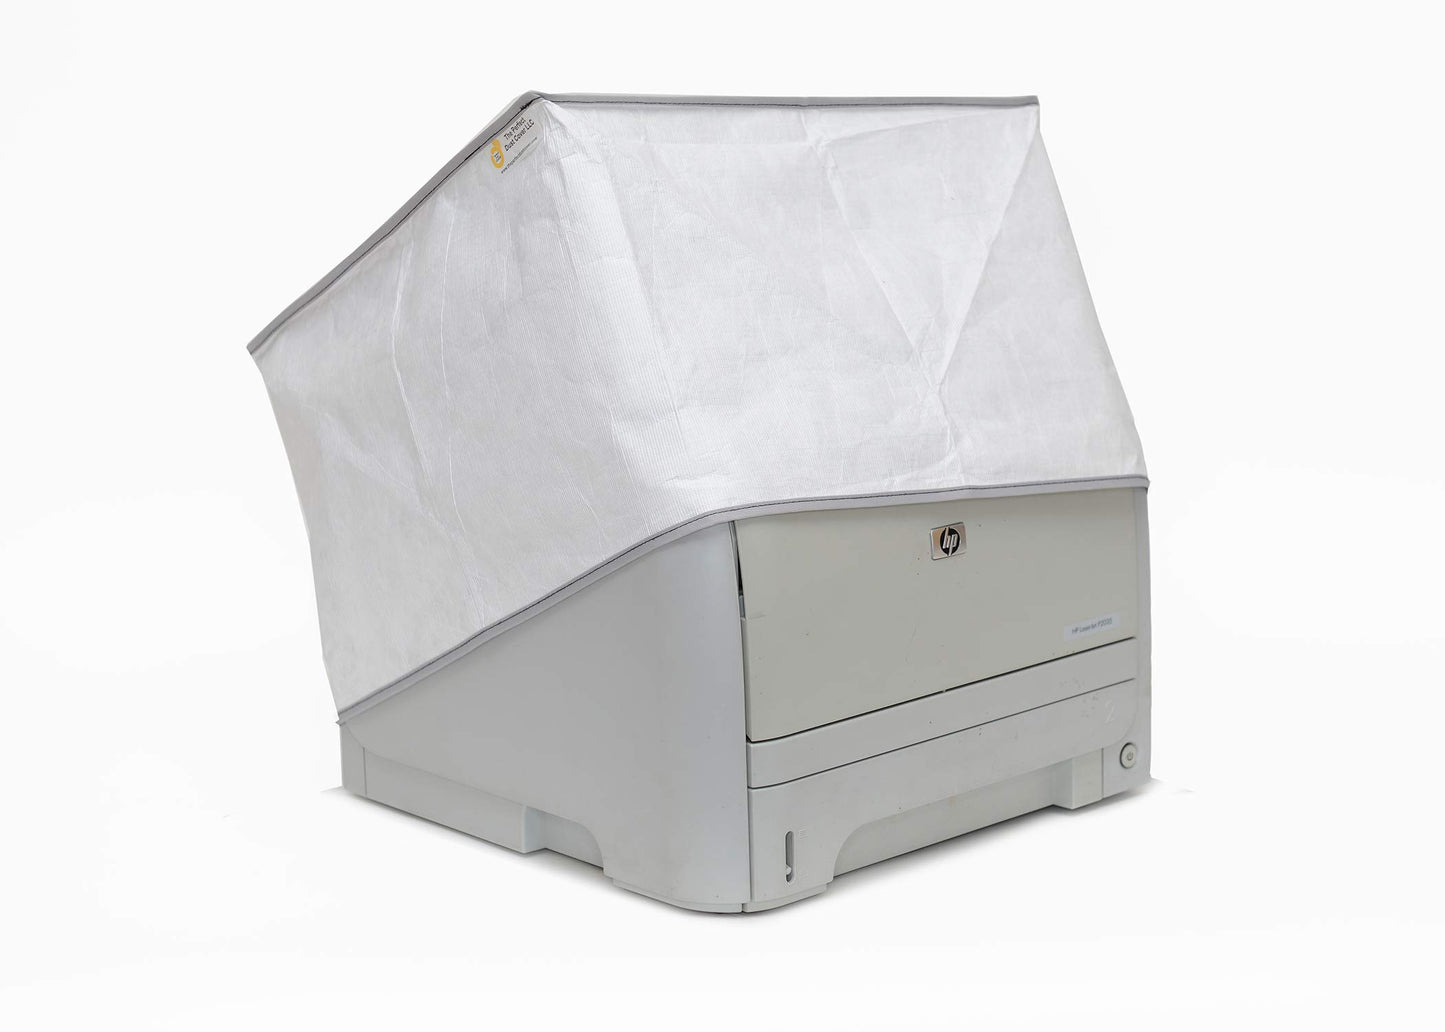 The Perfect Dust Cover, White Vinyl Cover for HP Laserjet Pro 400 M451dn Color Laser Printer, Anti Static and Waterproof Cover Dimensions 15.9''W x 19.1''D x 12.7''H by The Perfect Dust Cover LLC